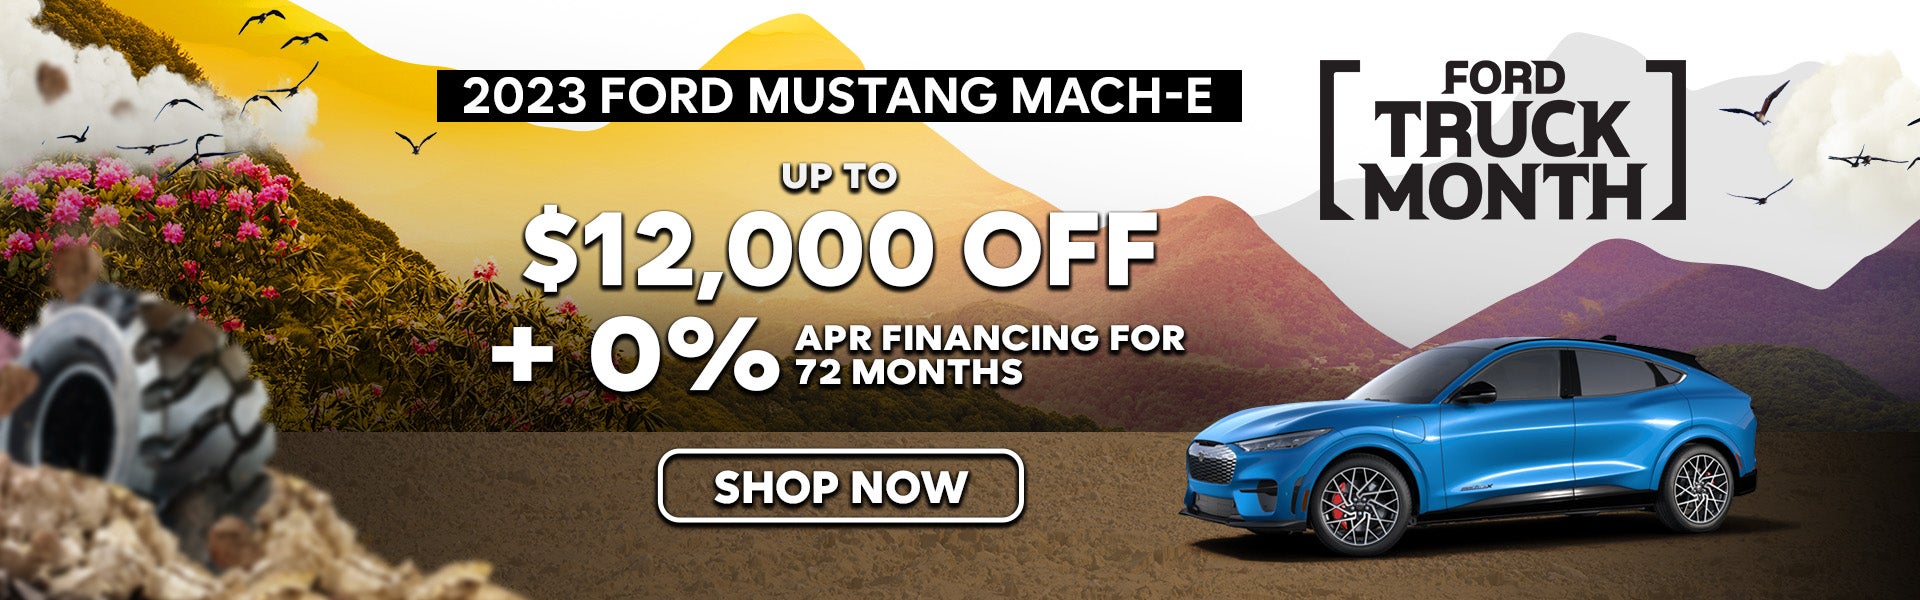 2023 Ford Mustang Mach-E Special Offer